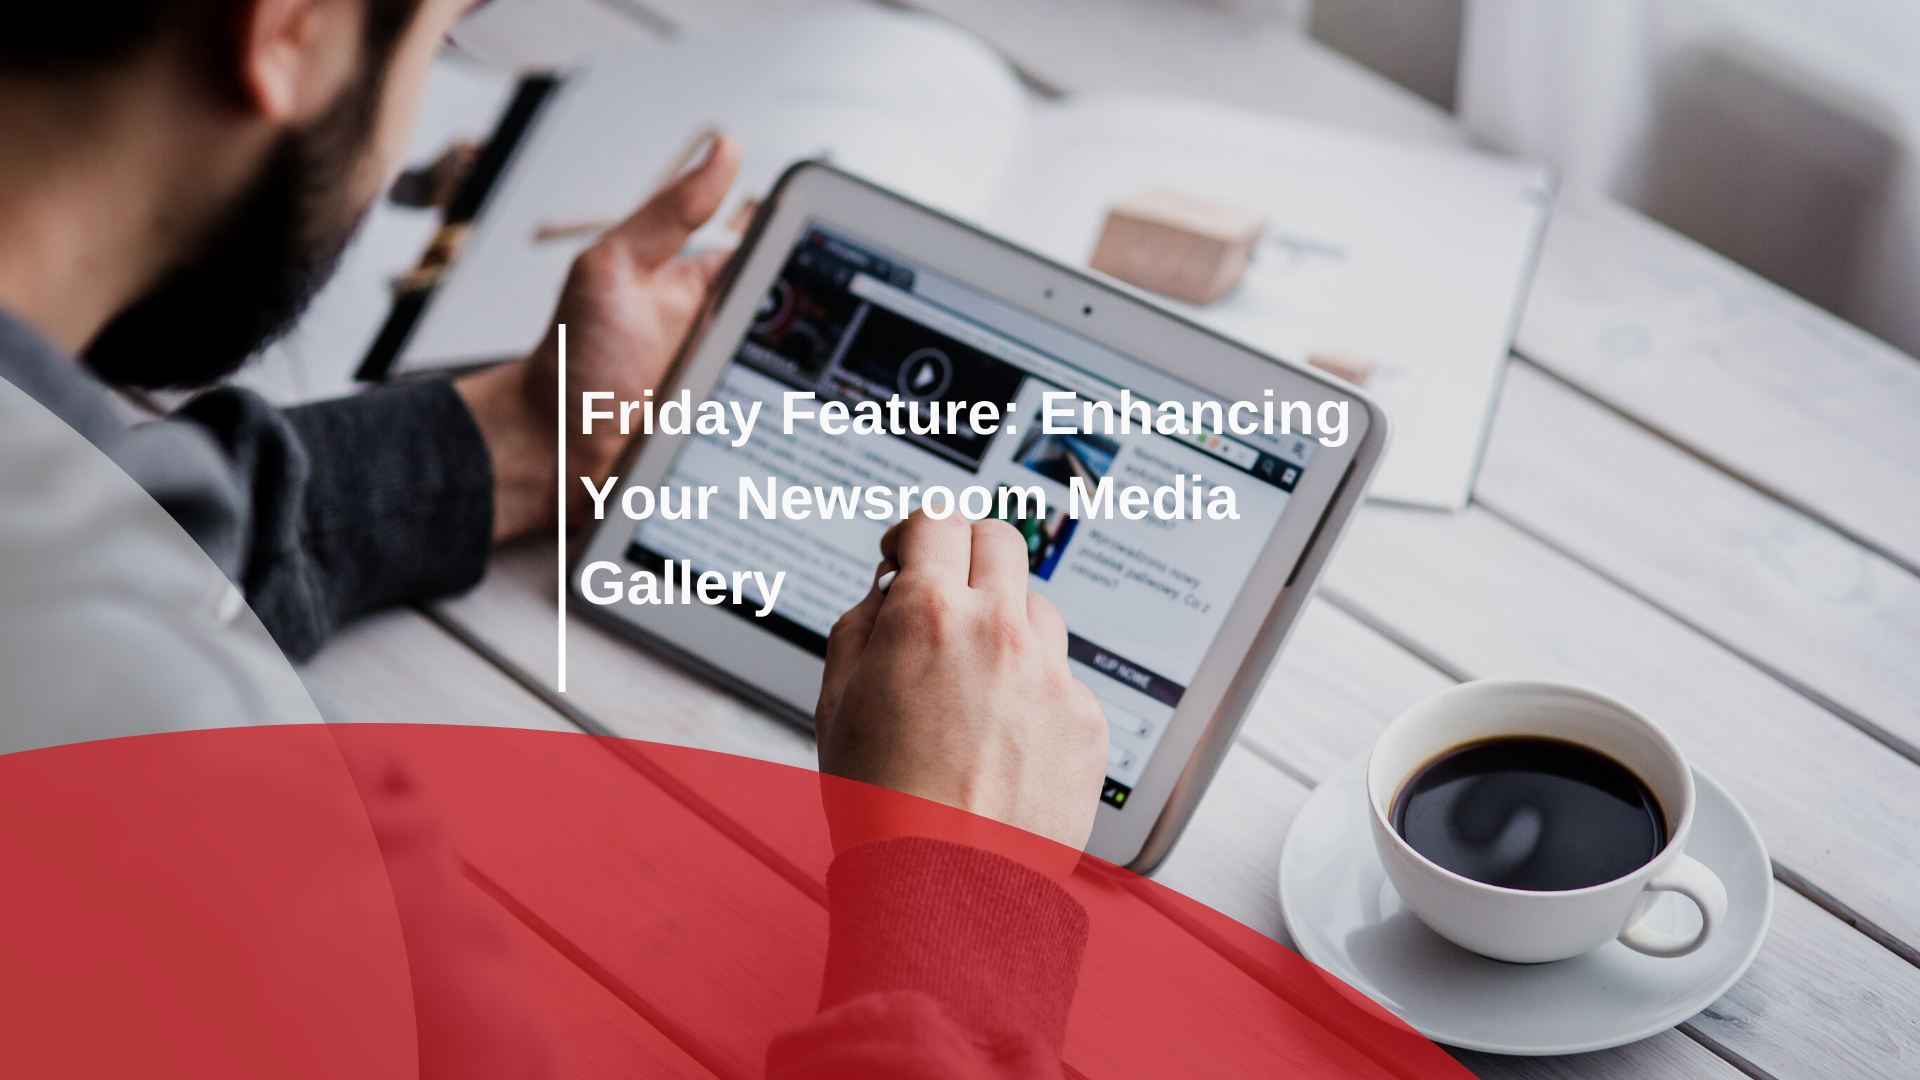 Friday Feature: Enhancing Your Newsroom Media Gallery